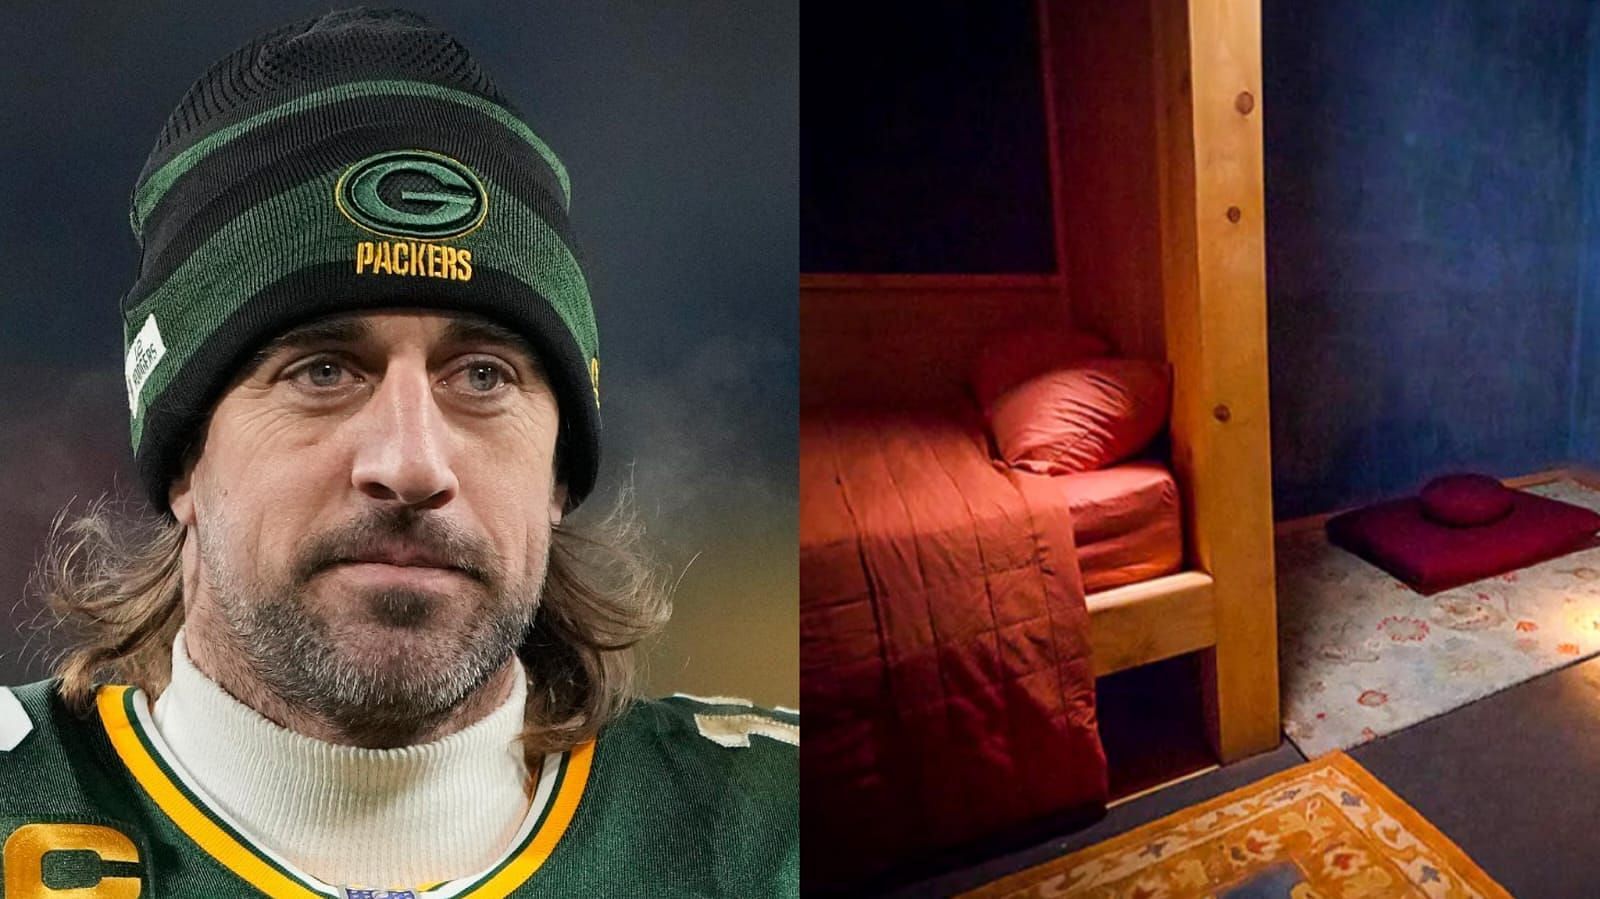 Aaron Rodgers has completed his darkness retreat